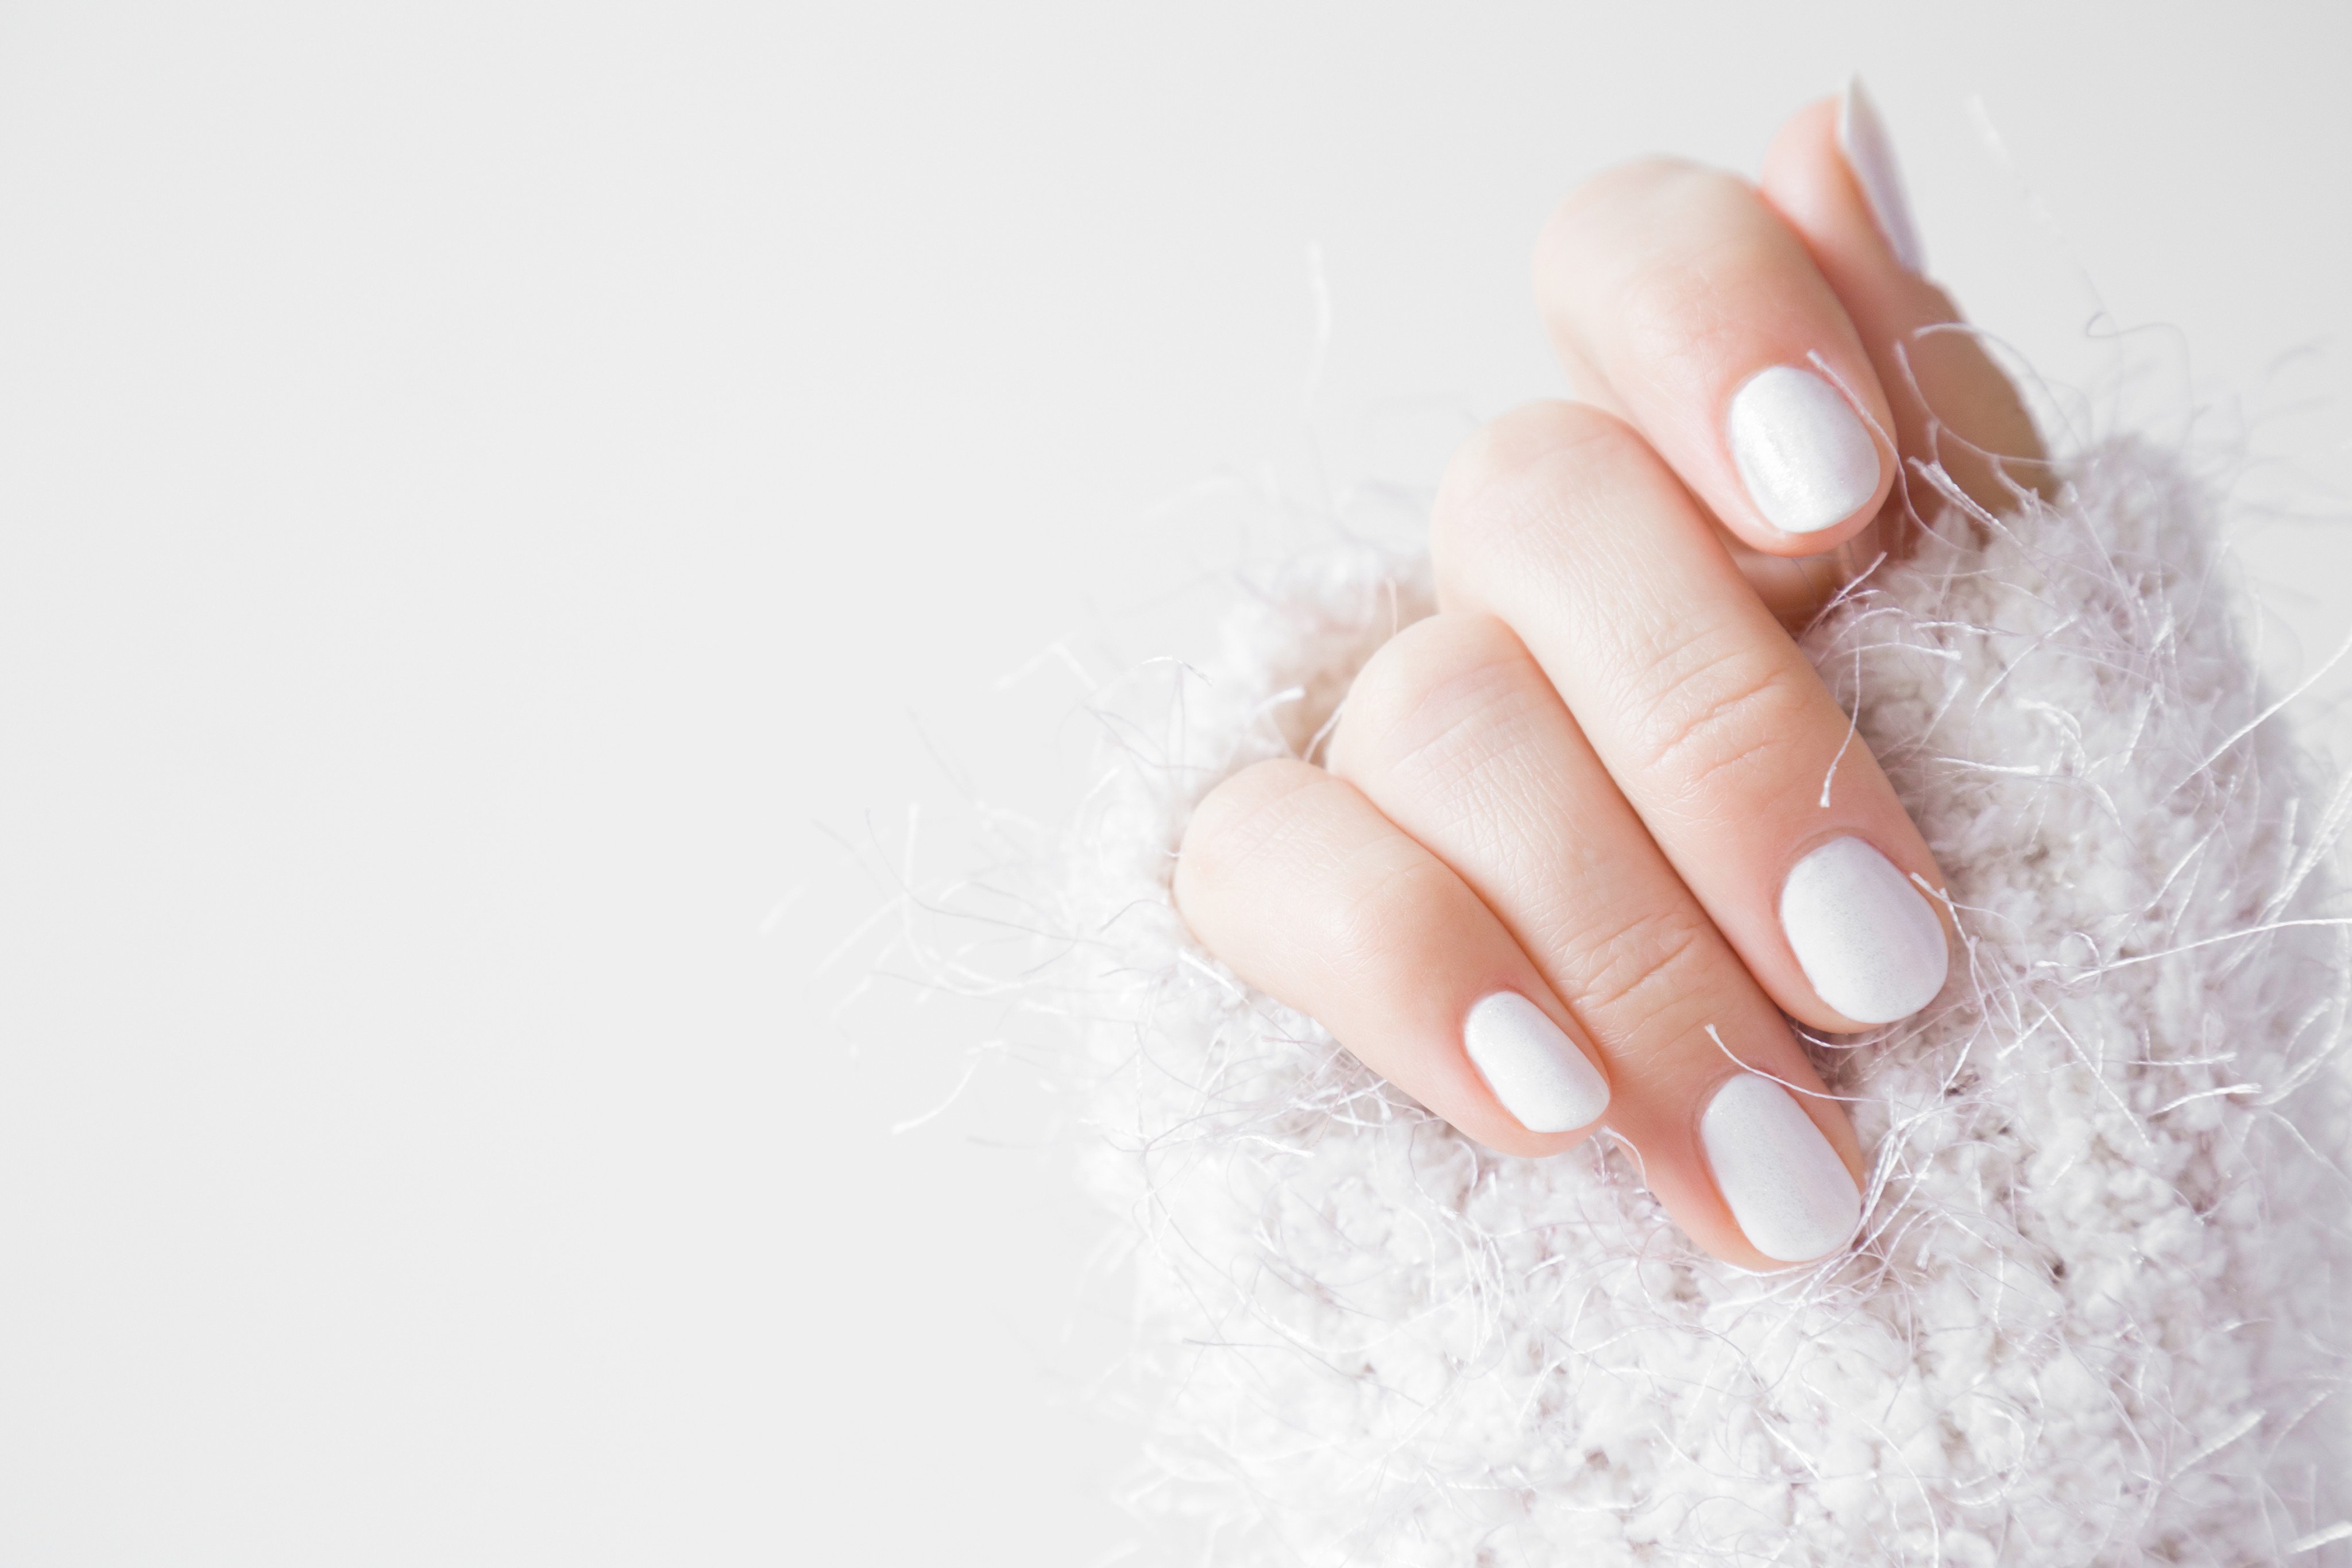 From nail strengtheners by Dior, Hermès, Paume and Dr’s Remedy, to Glosslab’s waterless mani-pedis that are better for nails and the environment, there are many ways to boost the health of your nails. Photo: Shutterstock